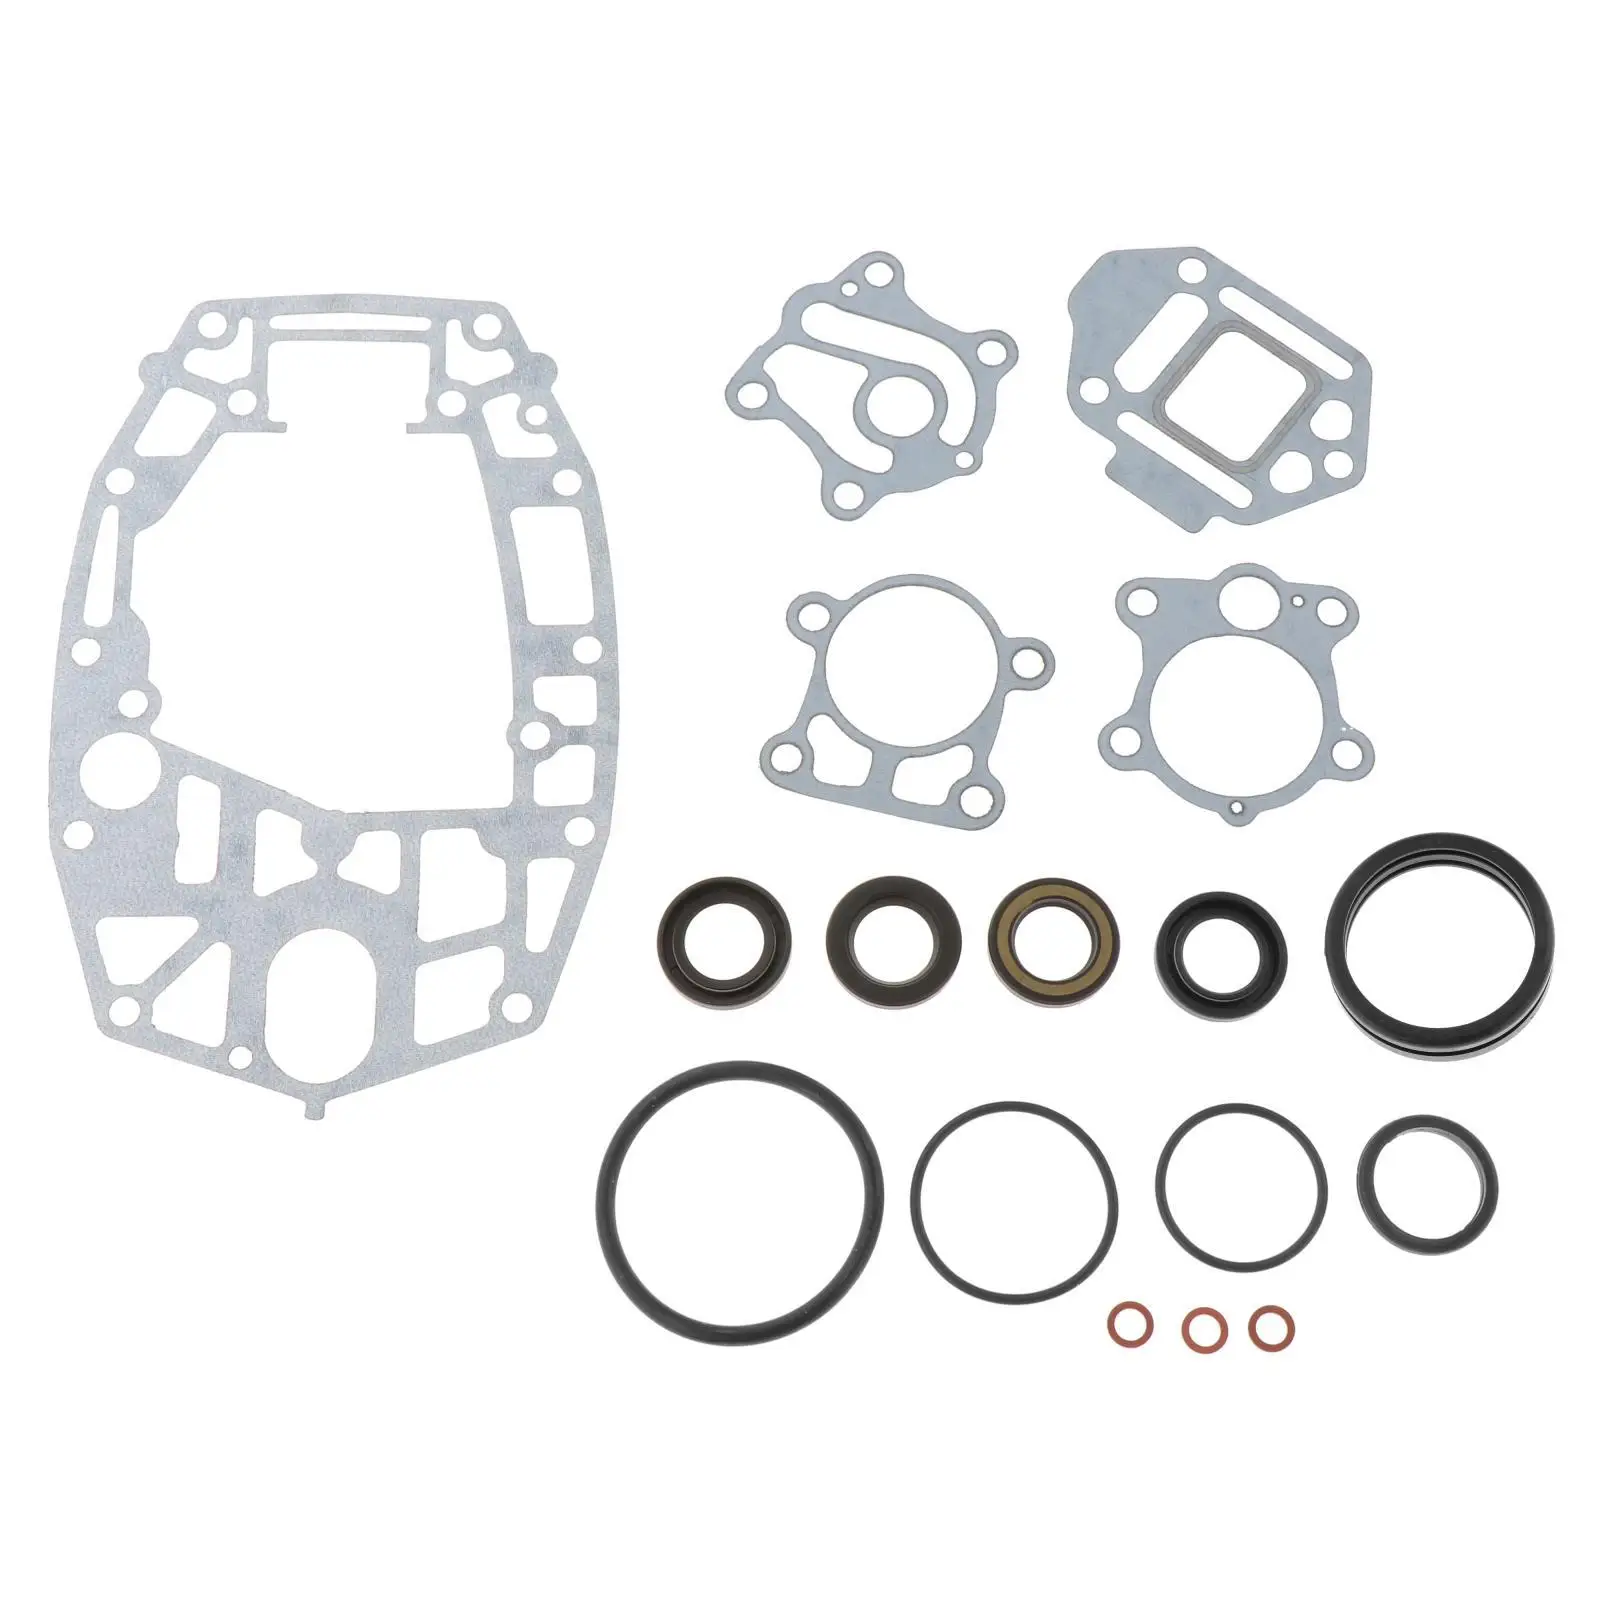 6H4-W0001-20-00 Lower Unit Seal, Gasket Gearcase 18-2792 6H4-W0001  Outboard Motor 3Cylinder Oil Seal